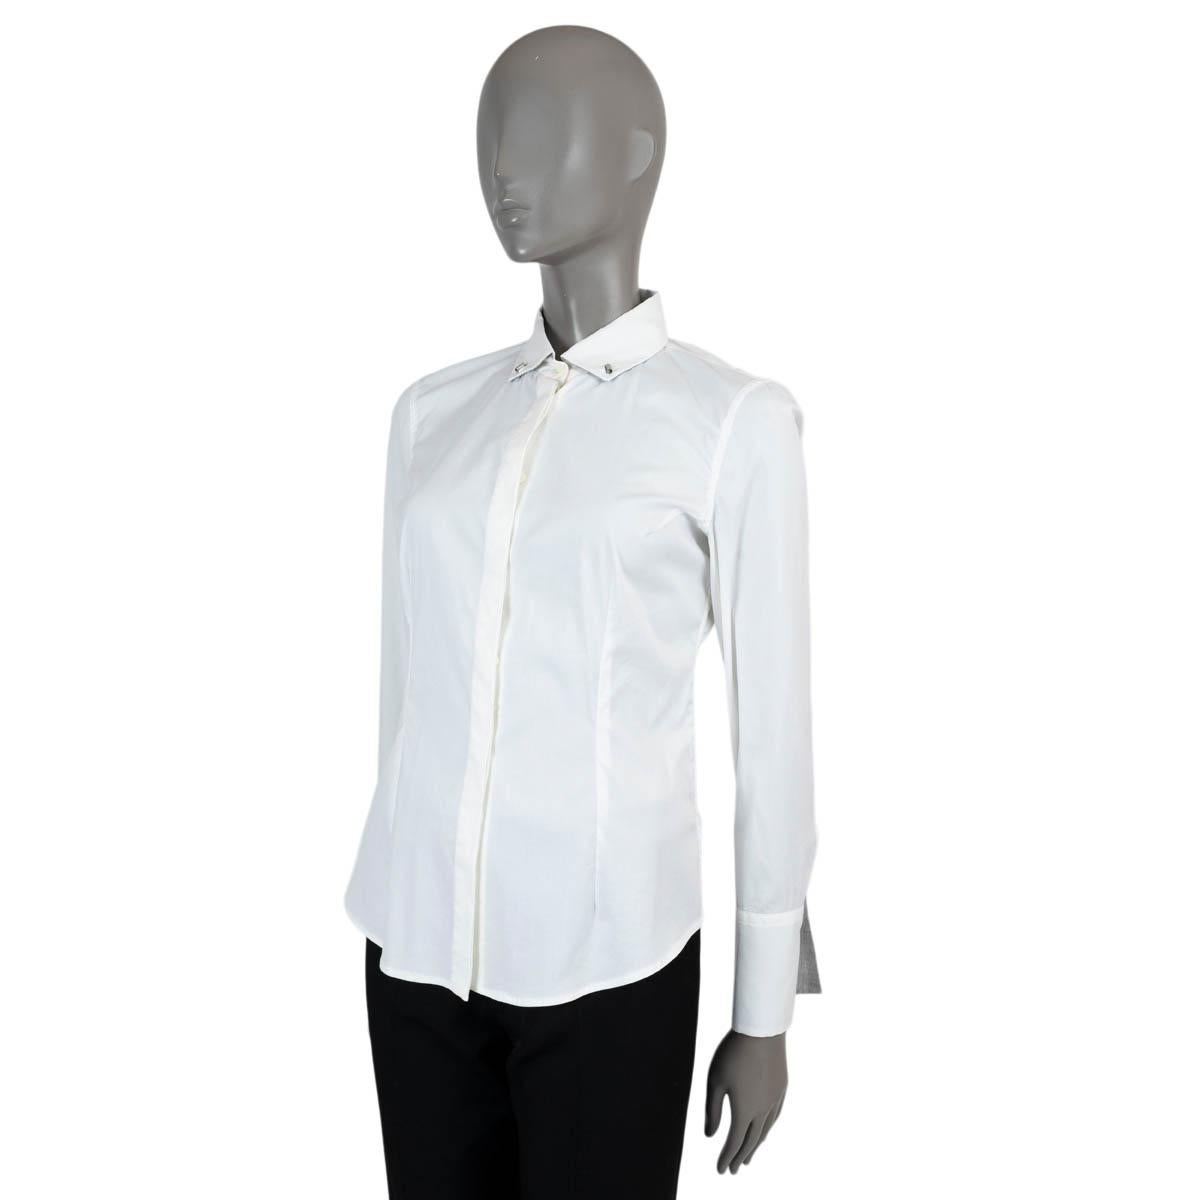 100% authentic Brunello Cucinelli poplin button-down shirt in white cotton (72%), polyamide (23%) and elastane (5%) - please note the content tag has been removed). Features sterling silver tubular buttons at the collar and cuffs, cuffs are lined in